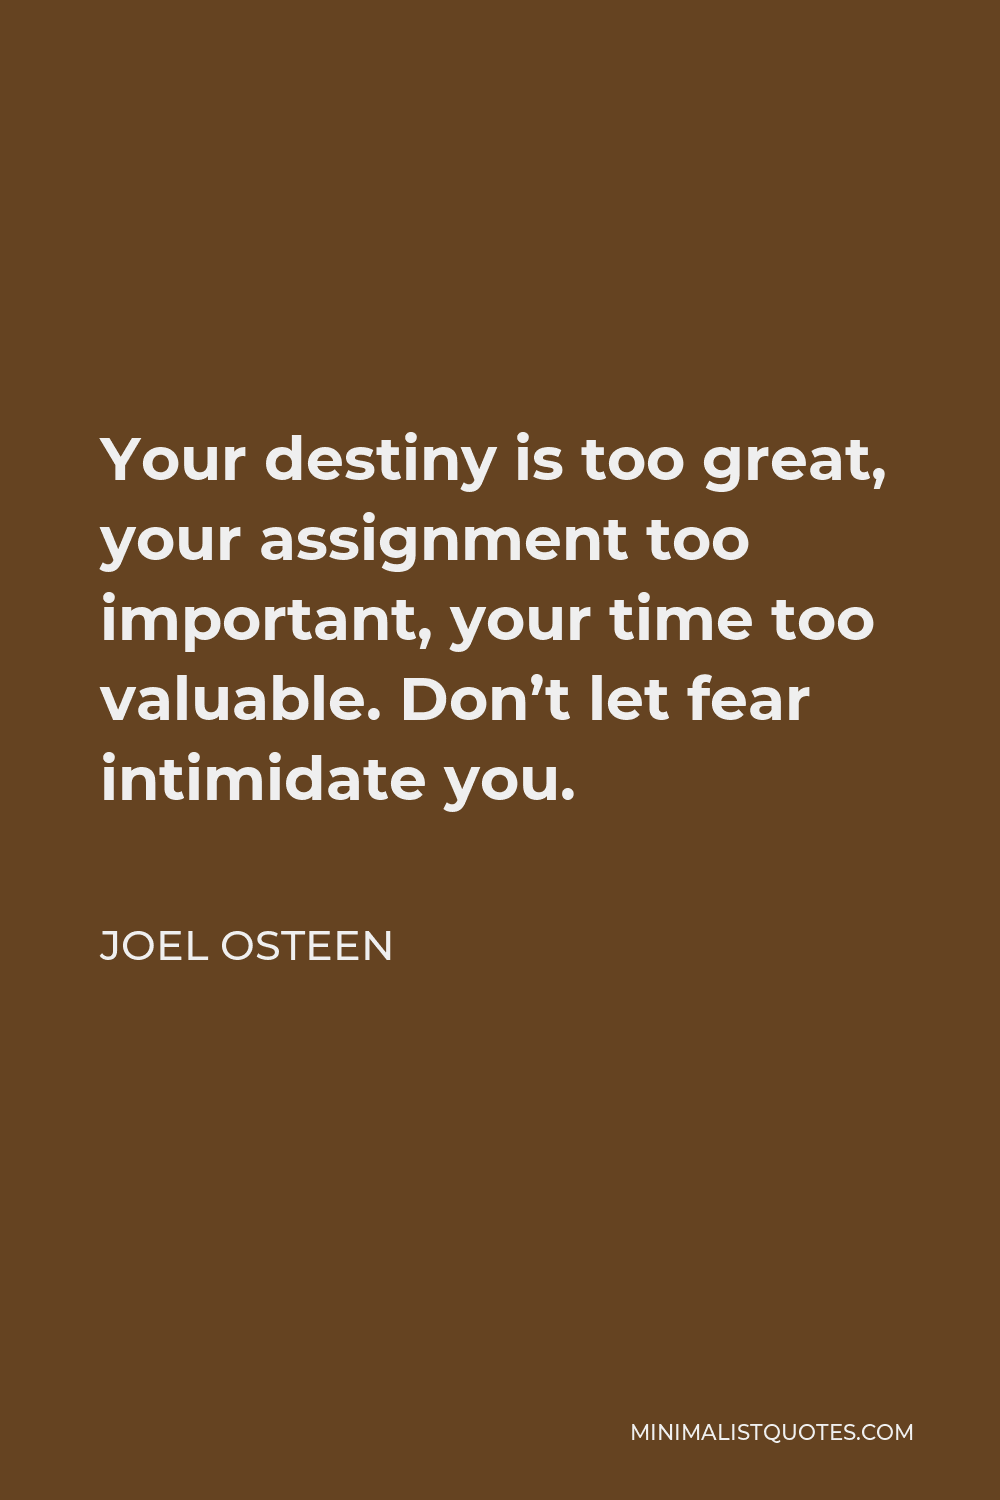 Joel Osteen Quote - Your destiny is too great, your assignment too important, your time too valuable. Don’t let fear intimidate you.